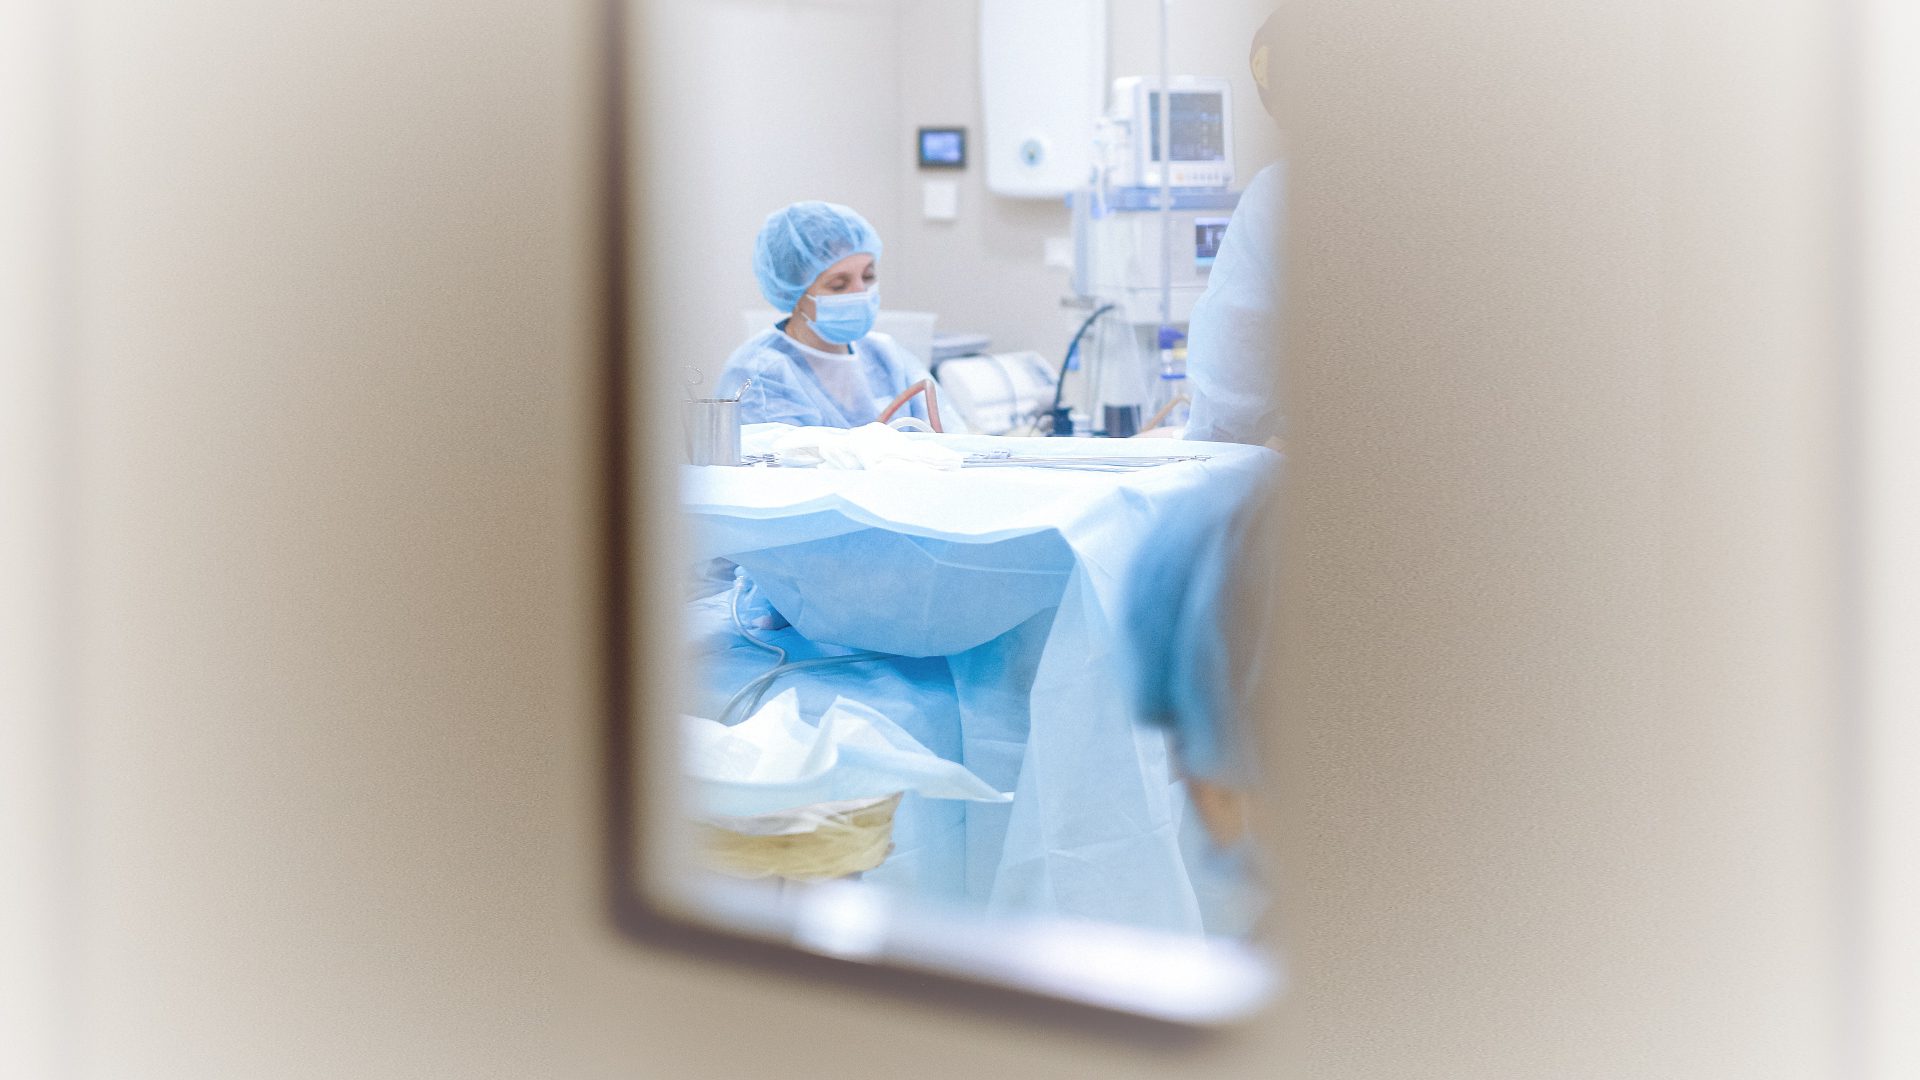 Operating Room stock photo by Anna Shvets